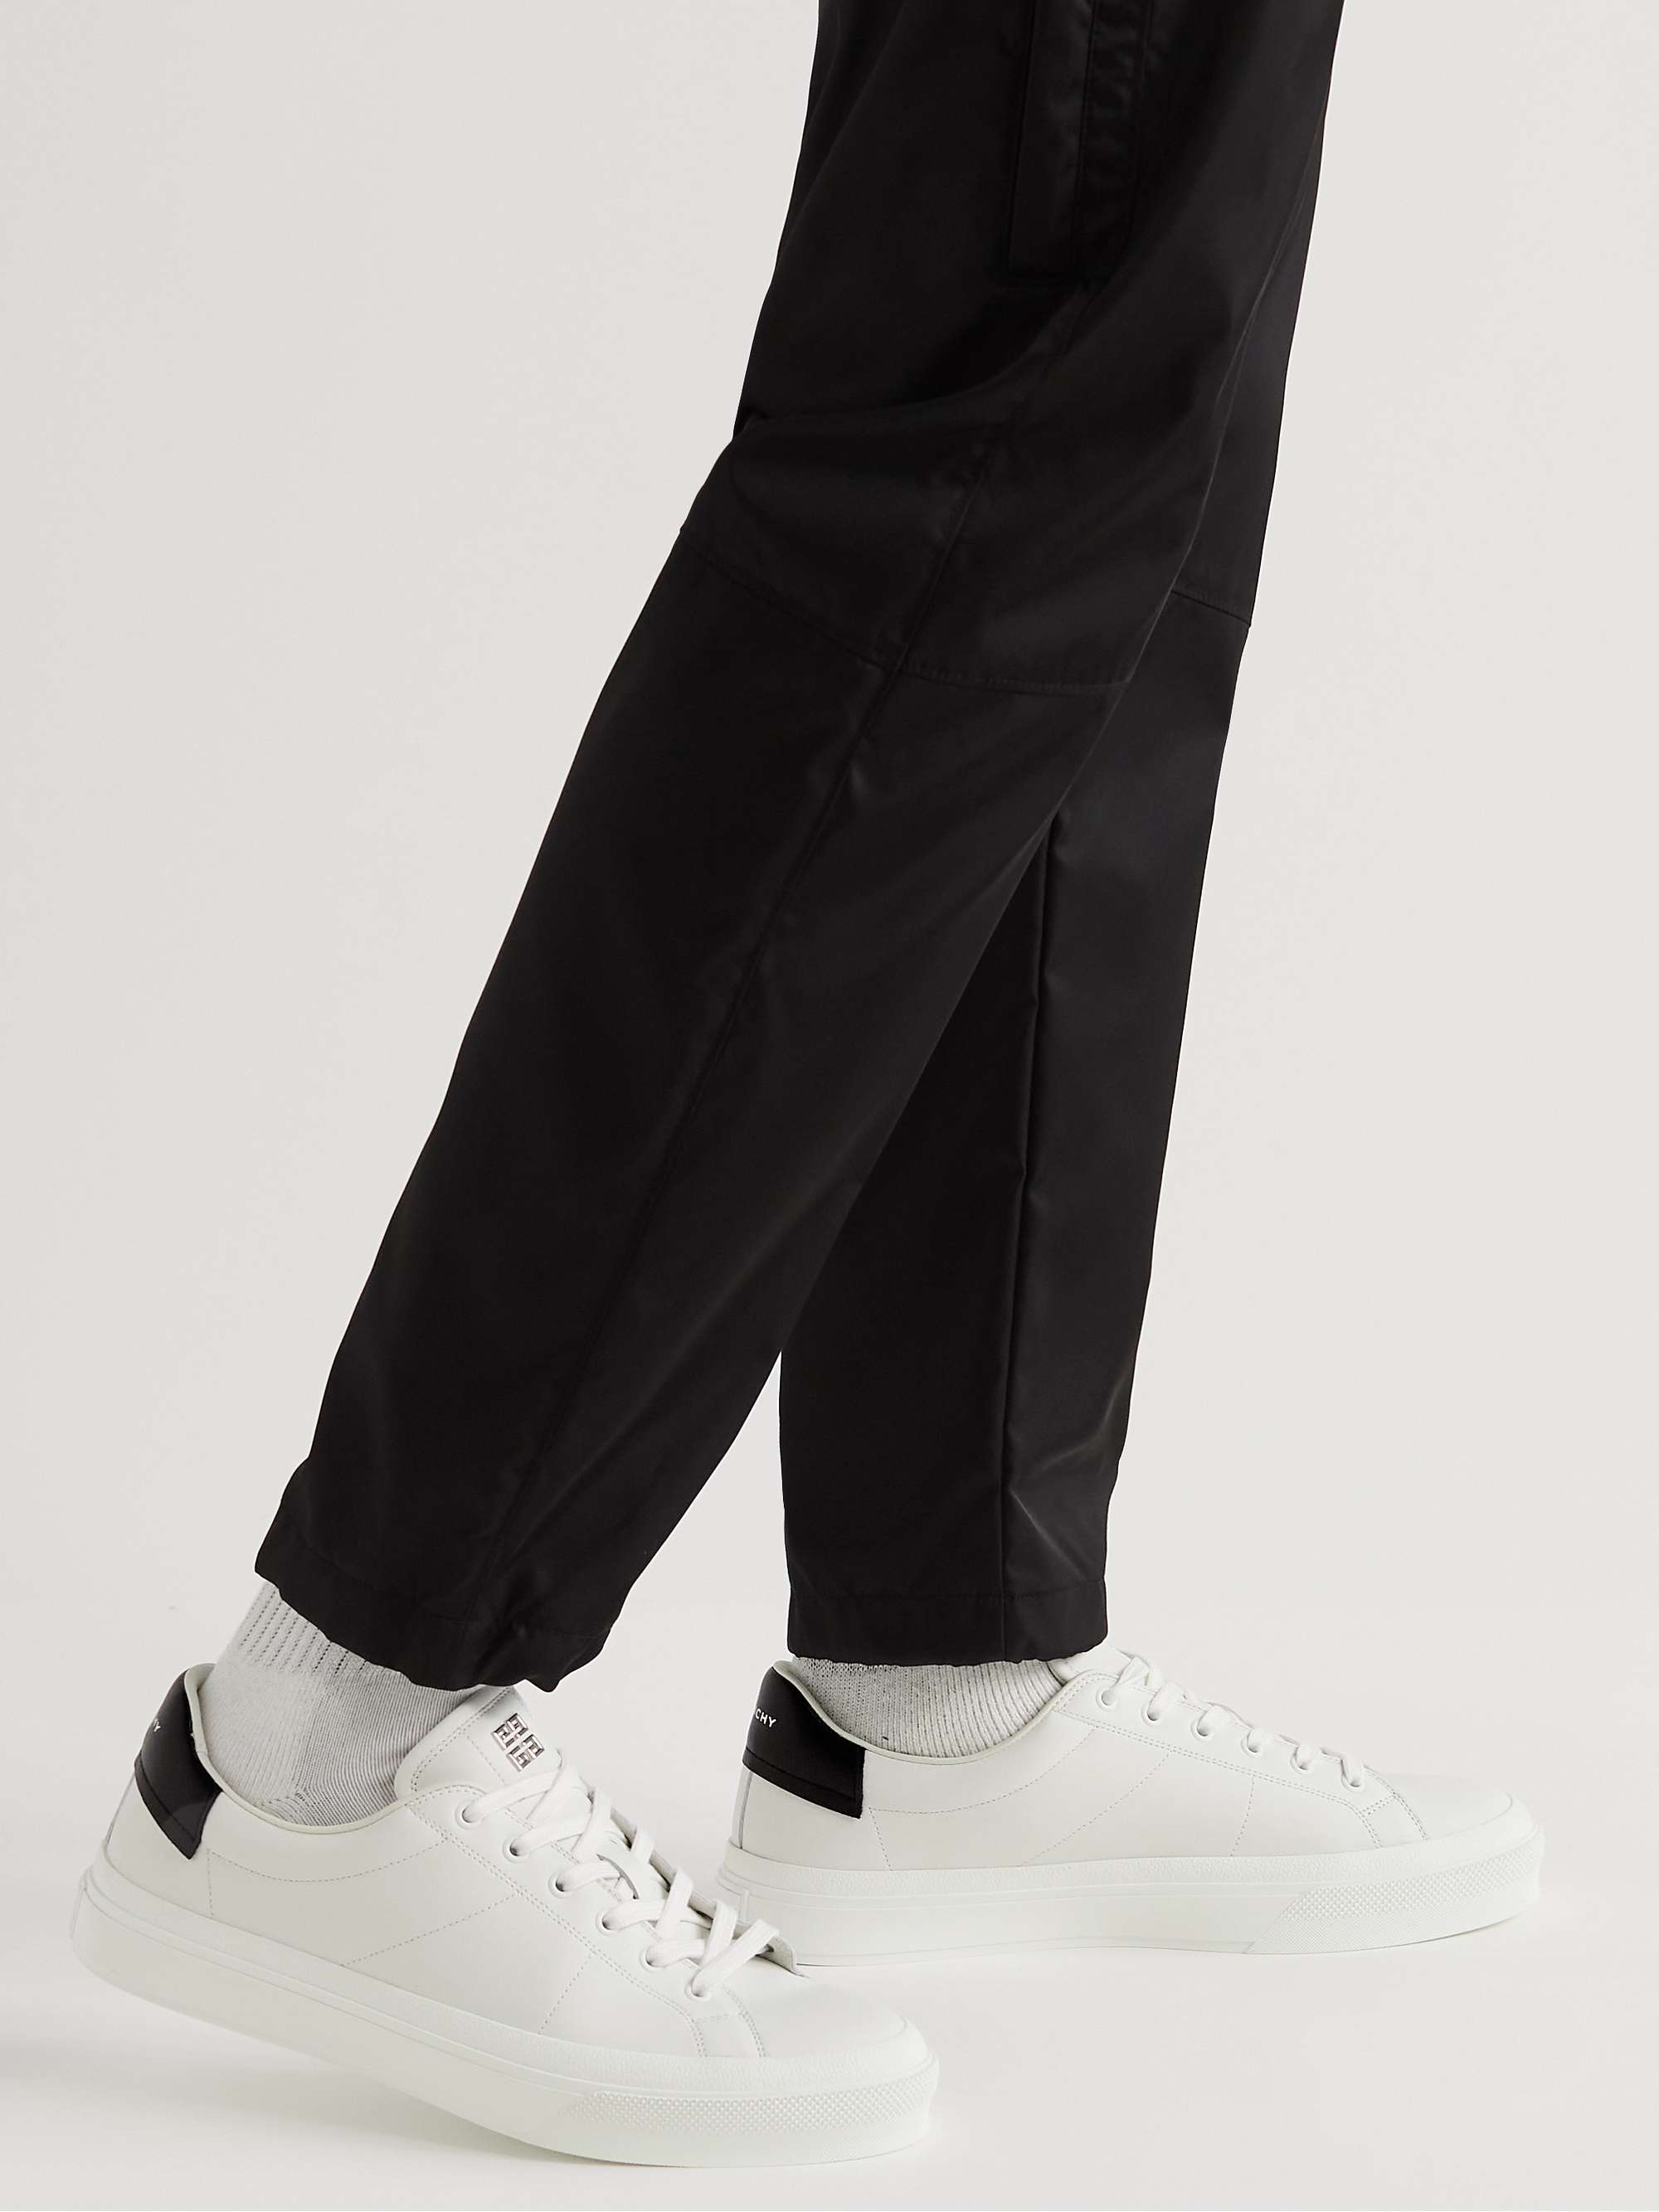 White City Sport Leather Sneakers | GIVENCHY | MR PORTER